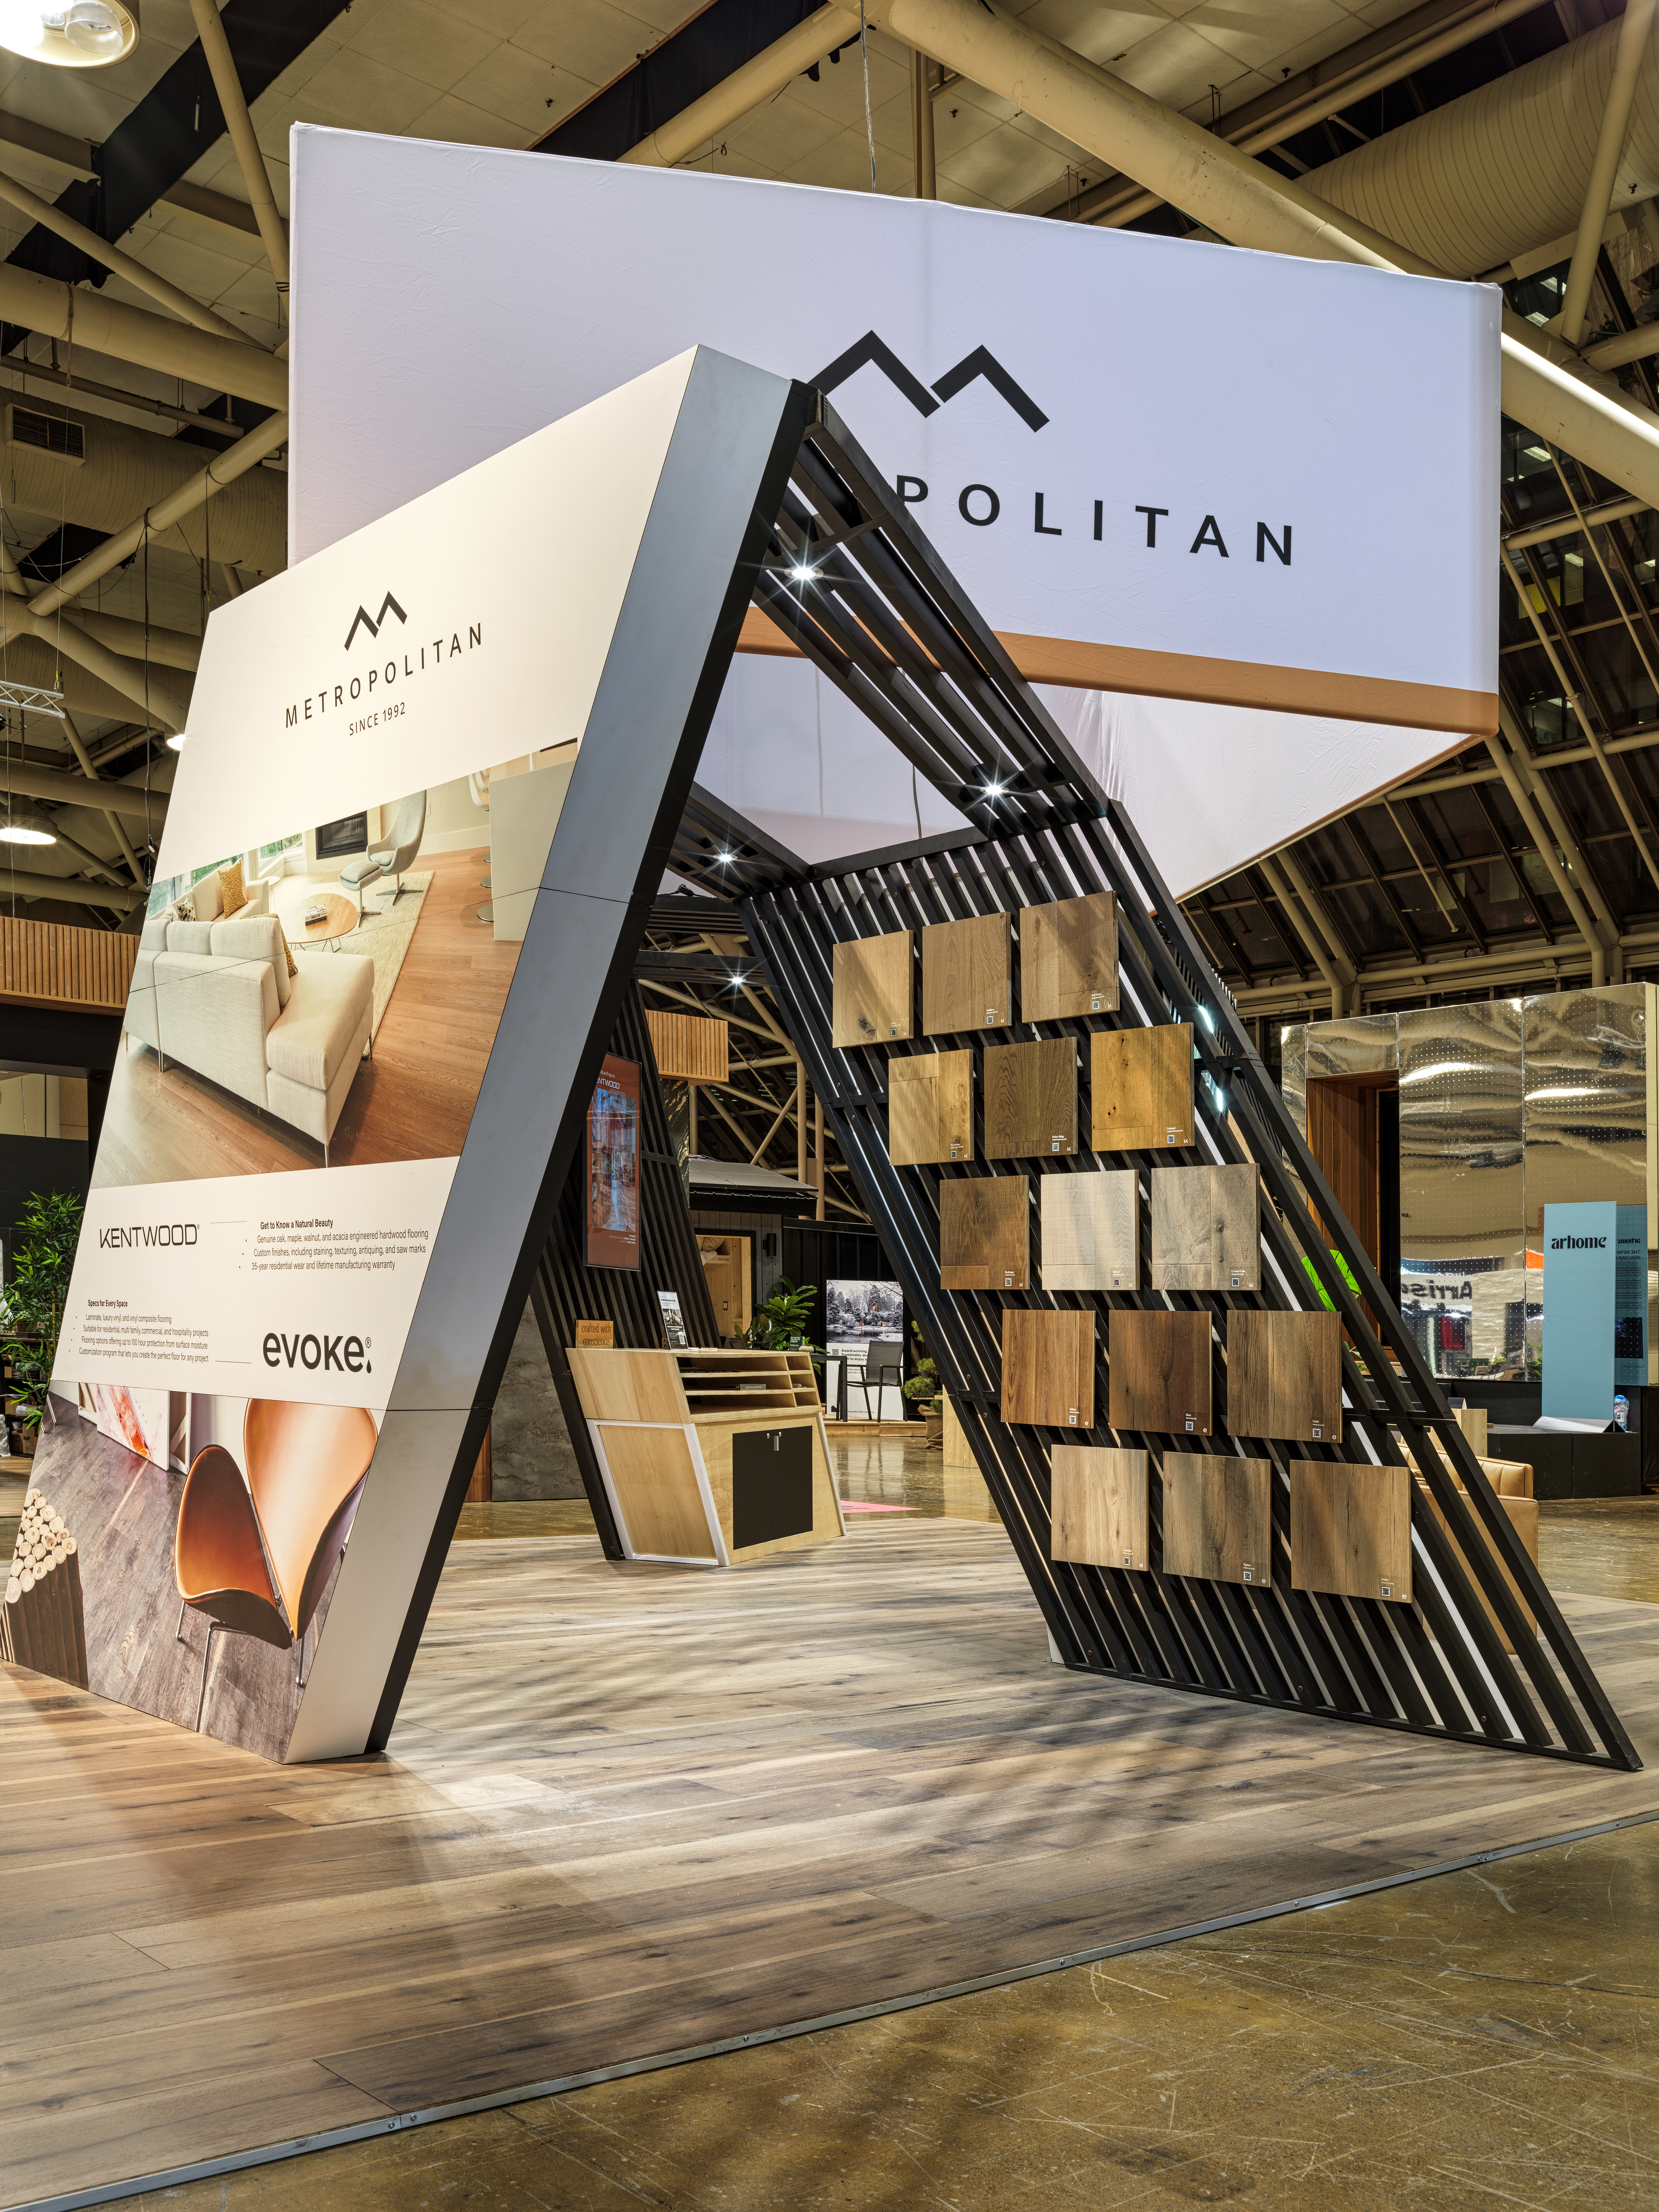 New flooring designs on display at the Metropolitan booth during IDS Toronto.